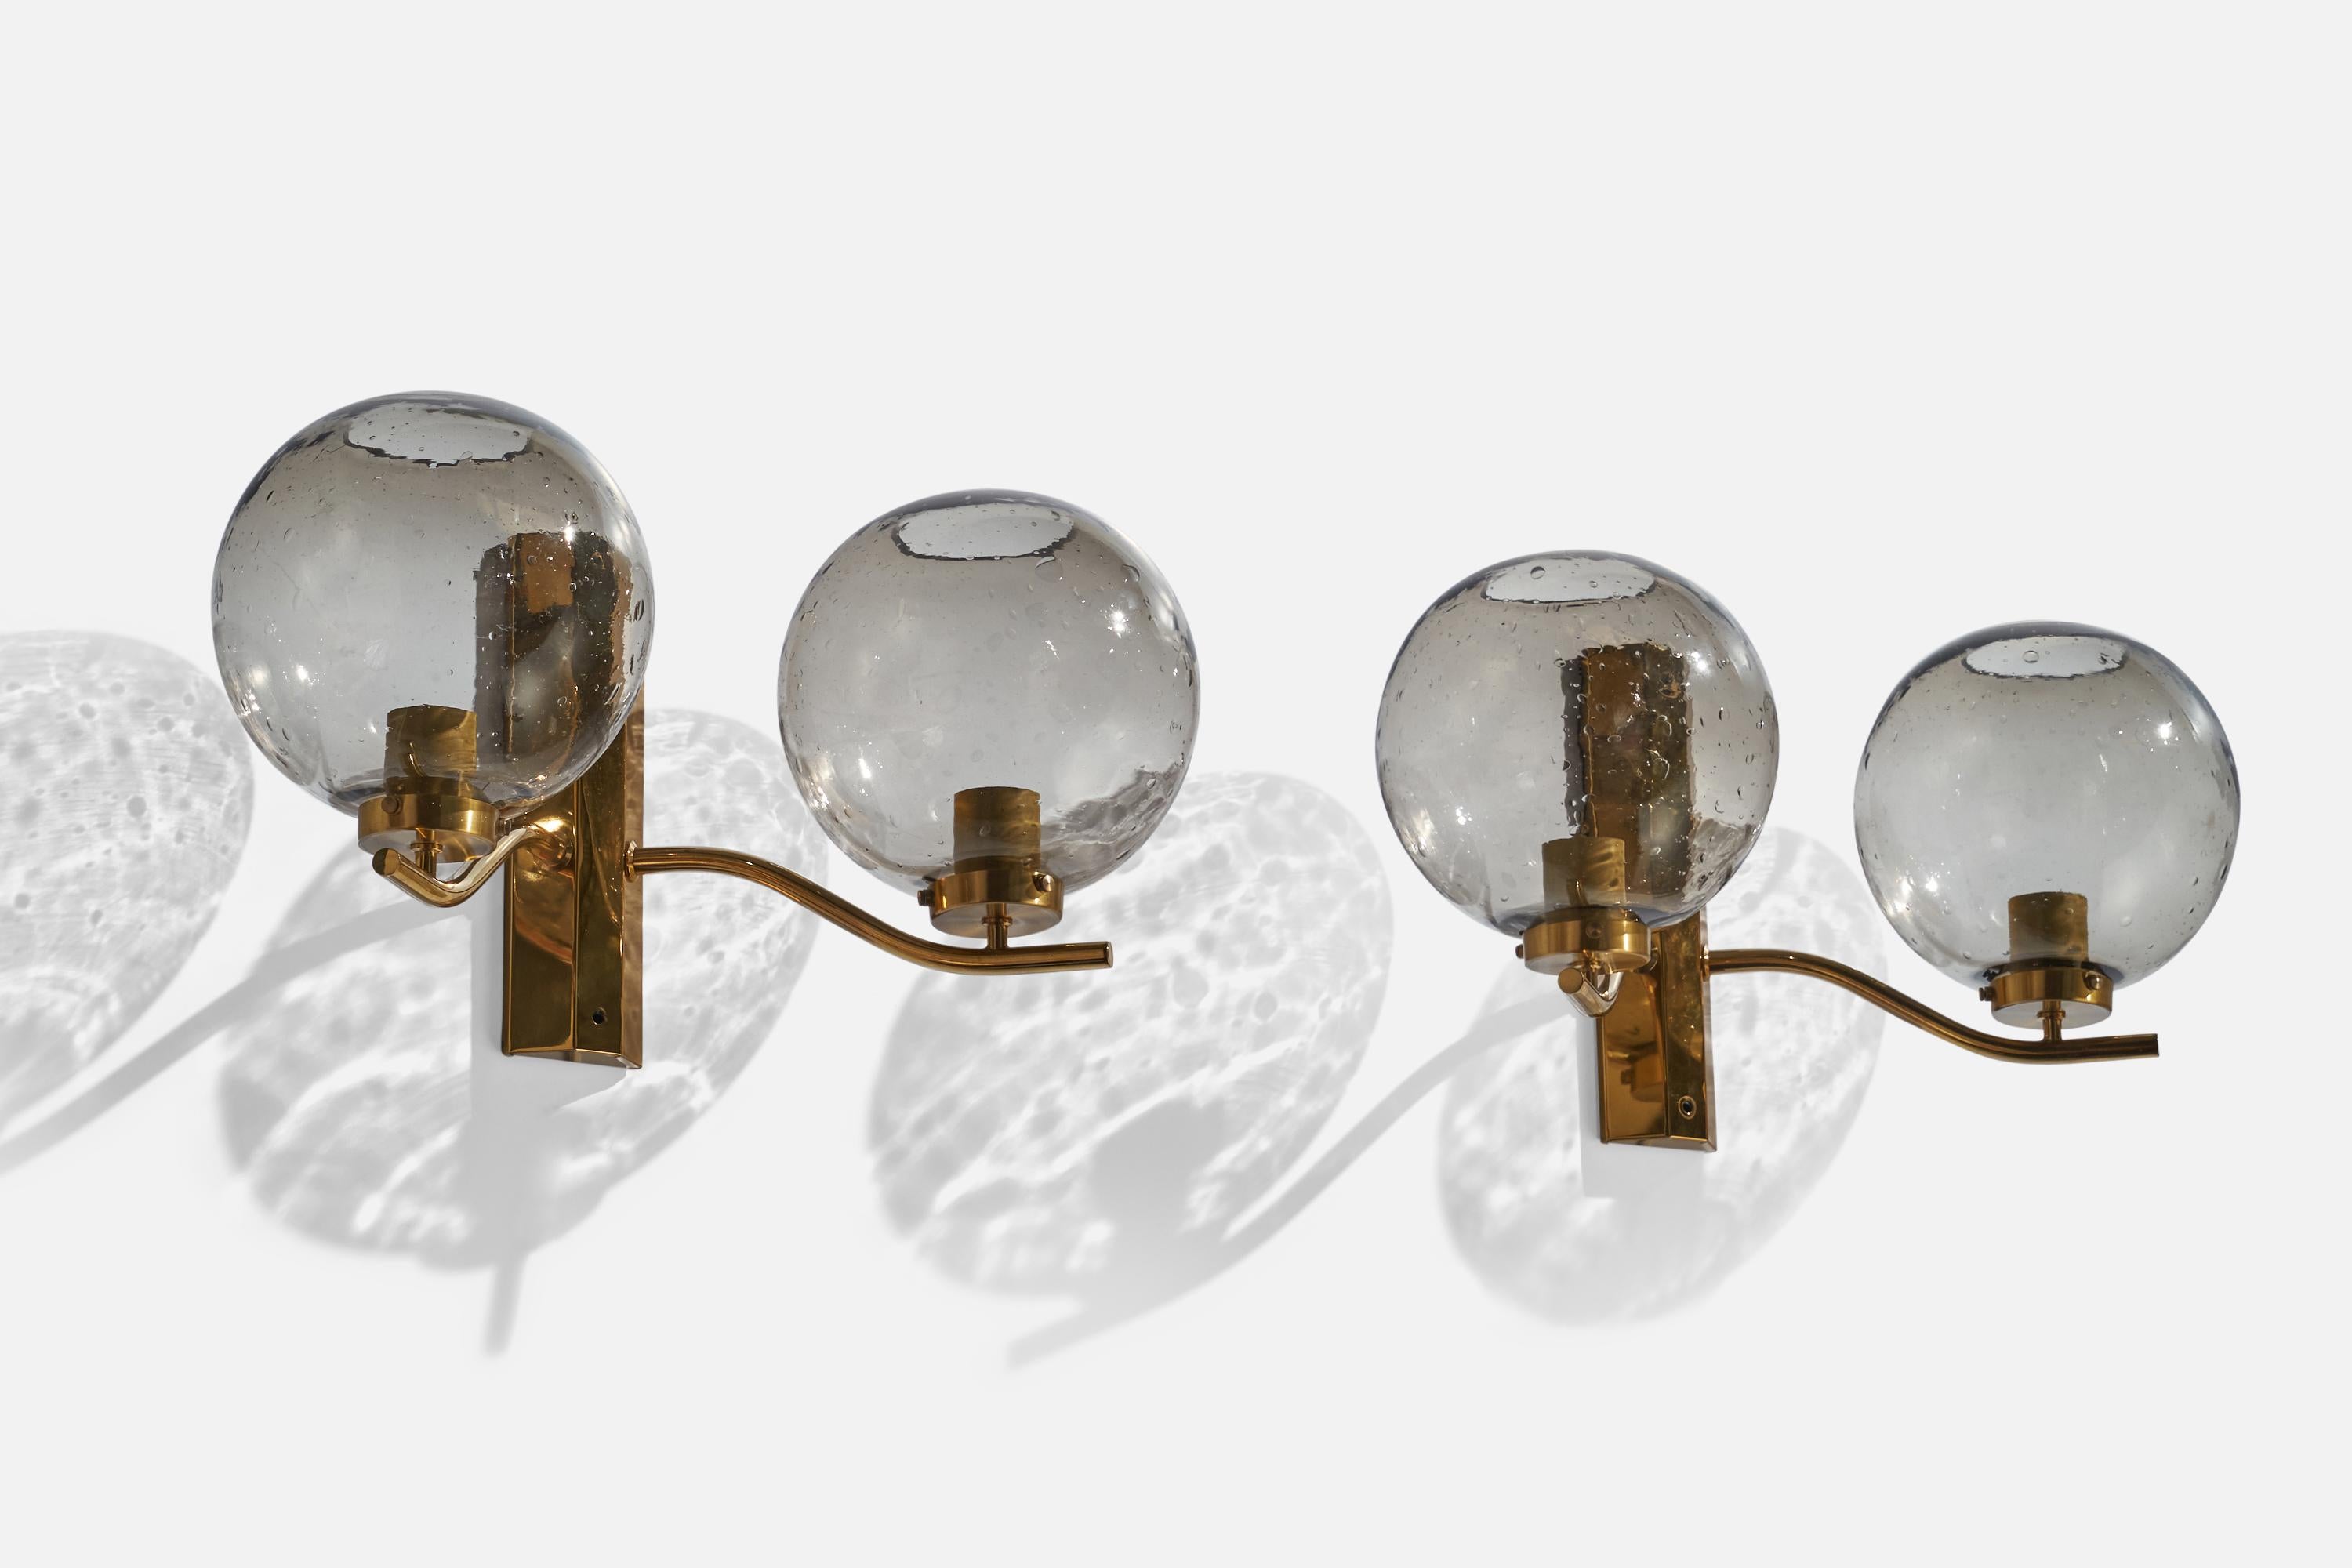 A pair of brass and smoked glass wall lights designed and produced by Westal Bankeryd, Sweden, 1970s.

Overall Dimensions (inches): 10” H x 19” W x 9.75” D
Back Plate Dimensions (inches): 10”  H x 2.75” W x 1.1” D
Bulb Specifications: E-26